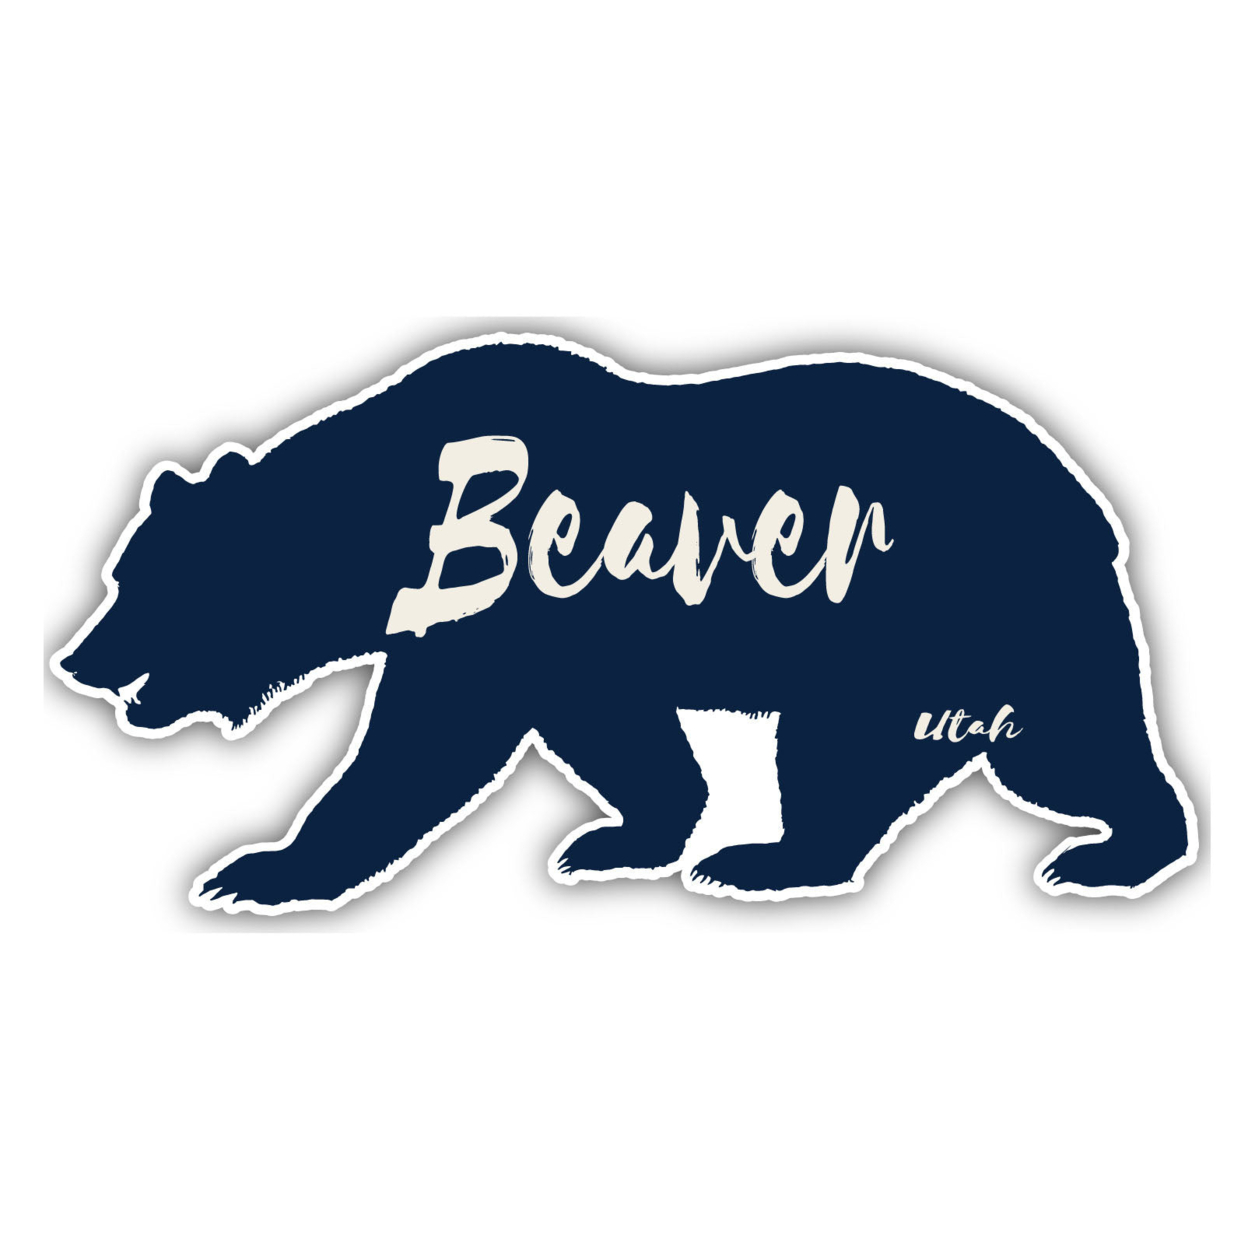 Beaver Utah Souvenir Decorative Stickers (Choose Theme And Size) - 4-Pack, 4-Inch, Adventures Awaits